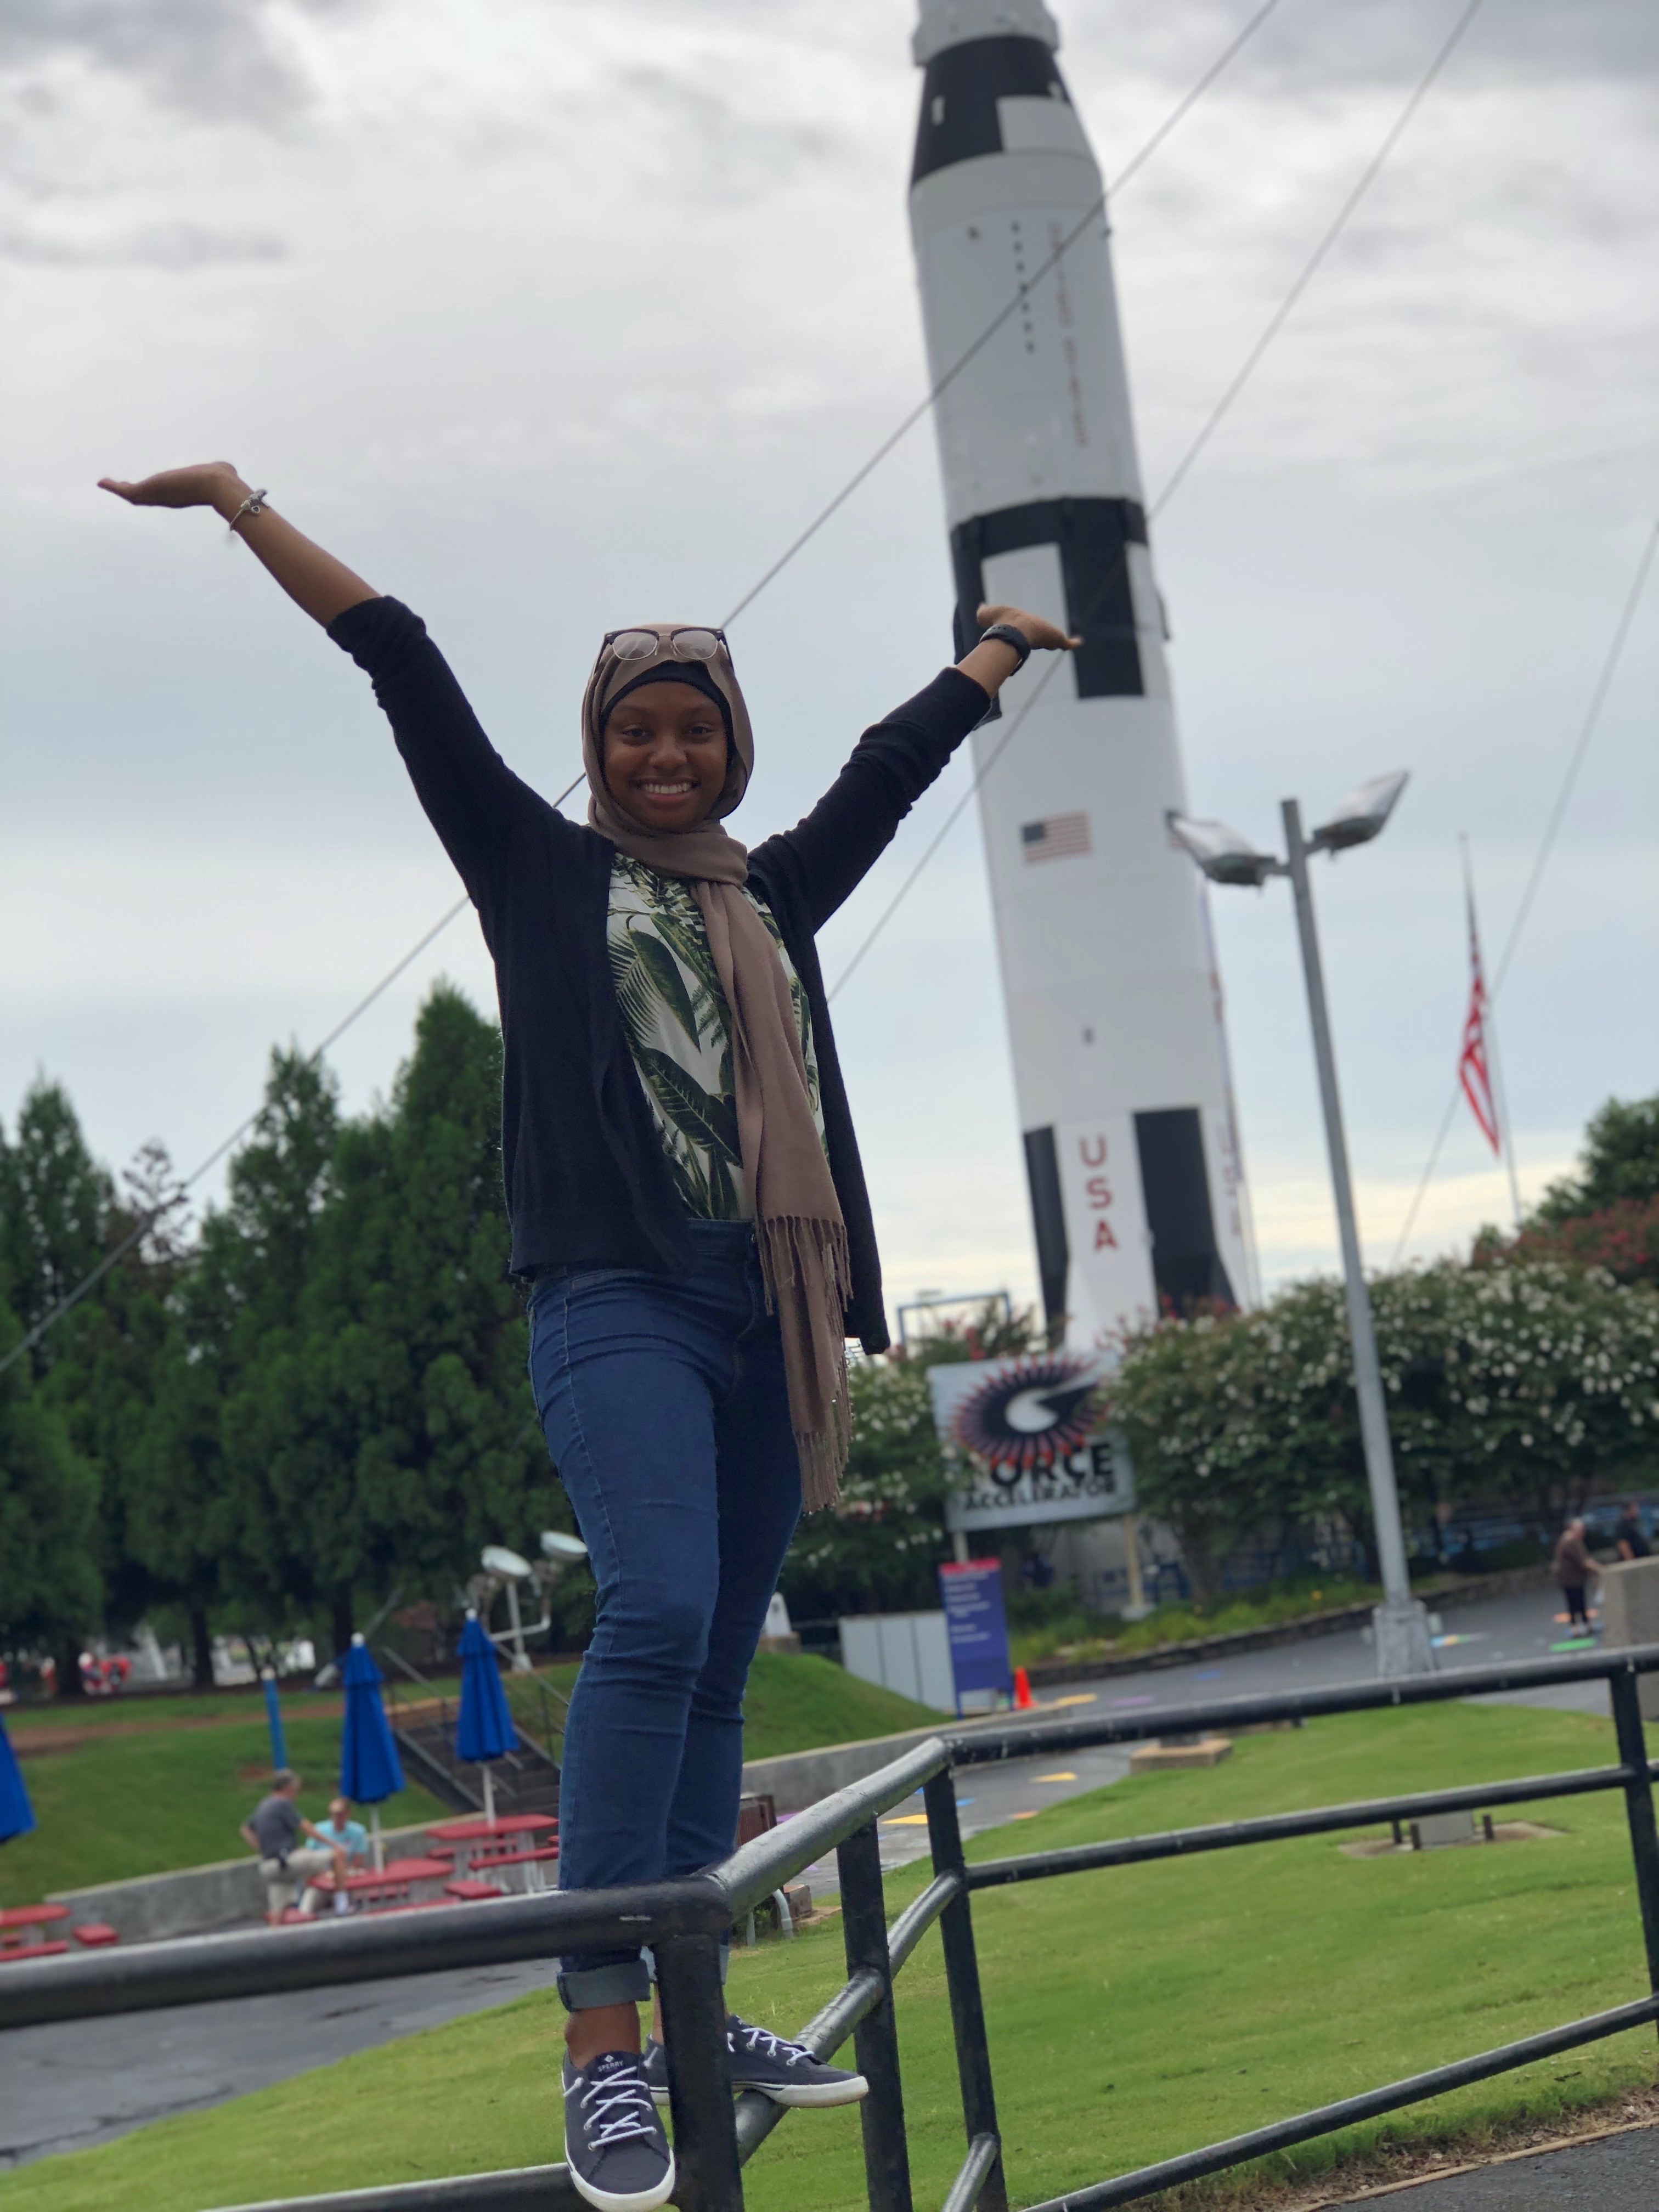 Zainab is posing, with a big smile and arms flung upwards, outdoors before a giant white rocket with the American flag on it. 